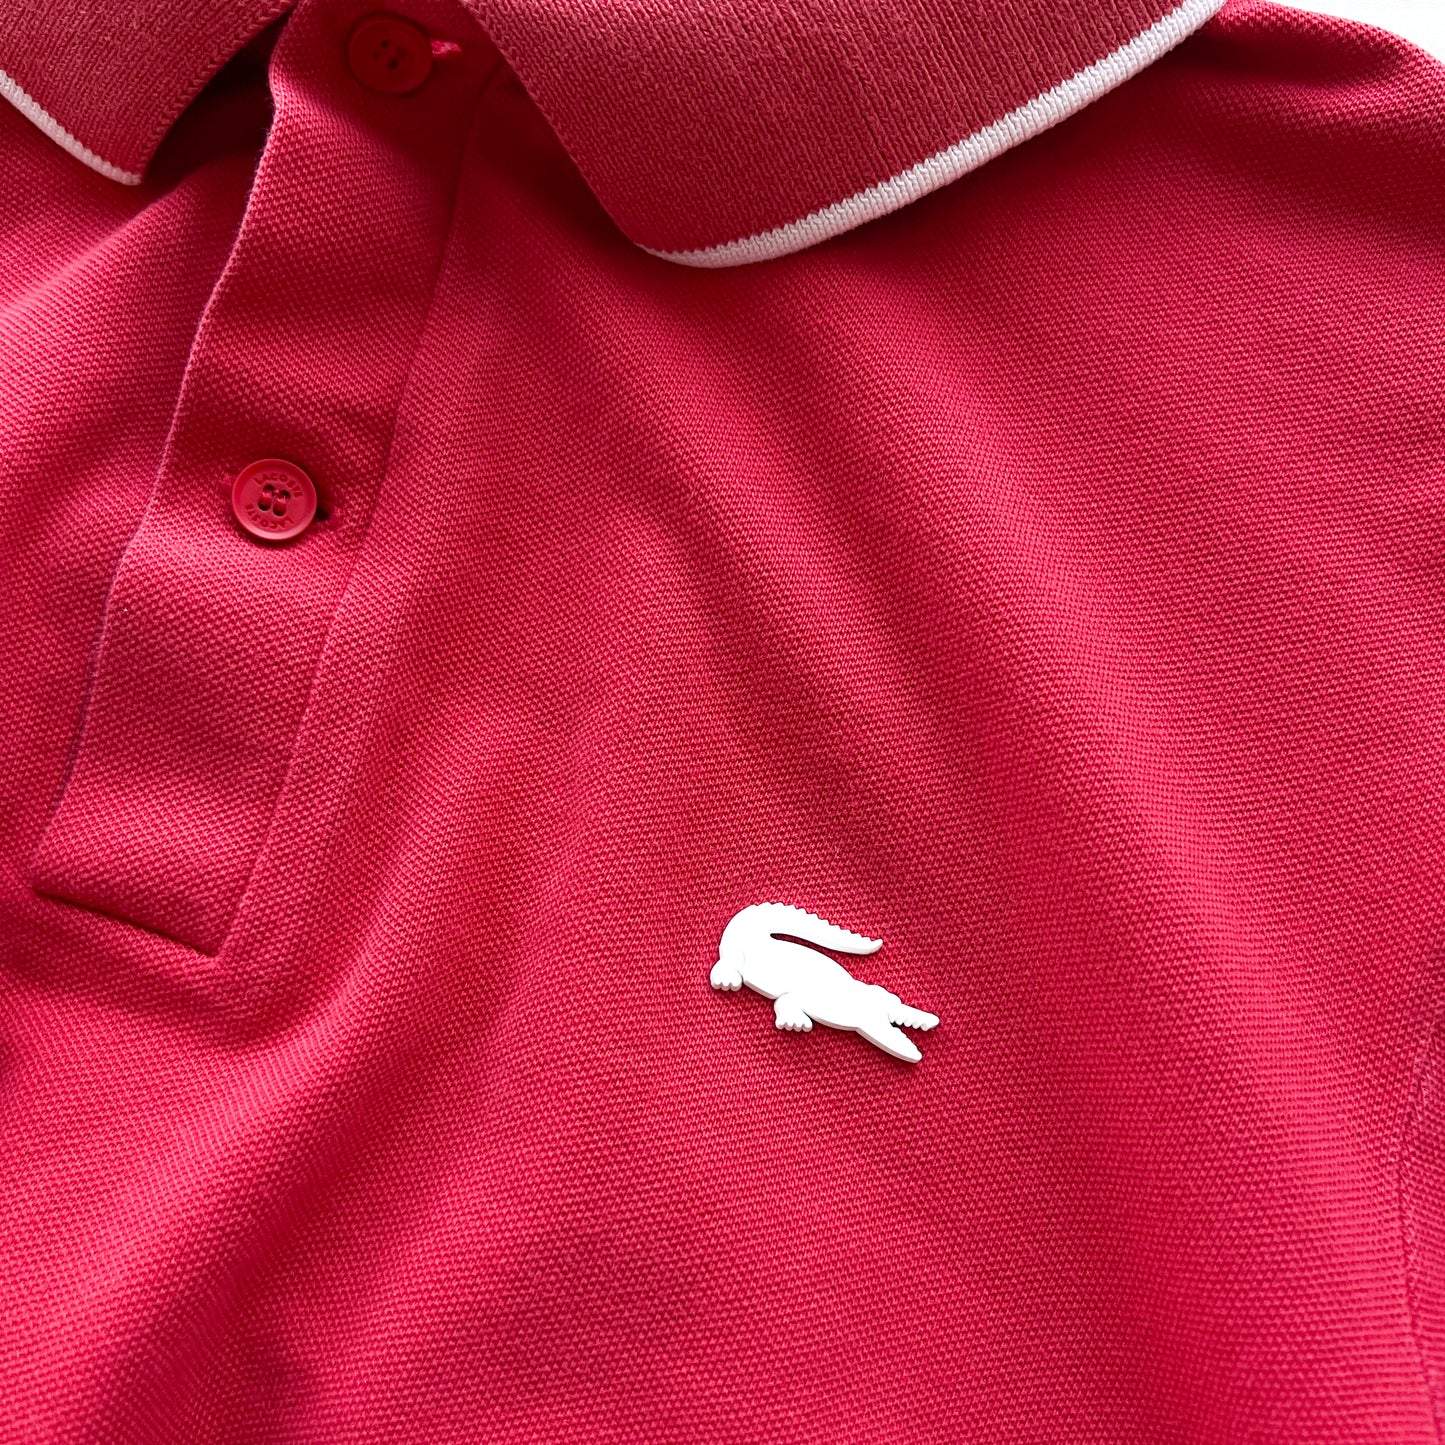 (XS) Lacoste polo crop vintage red